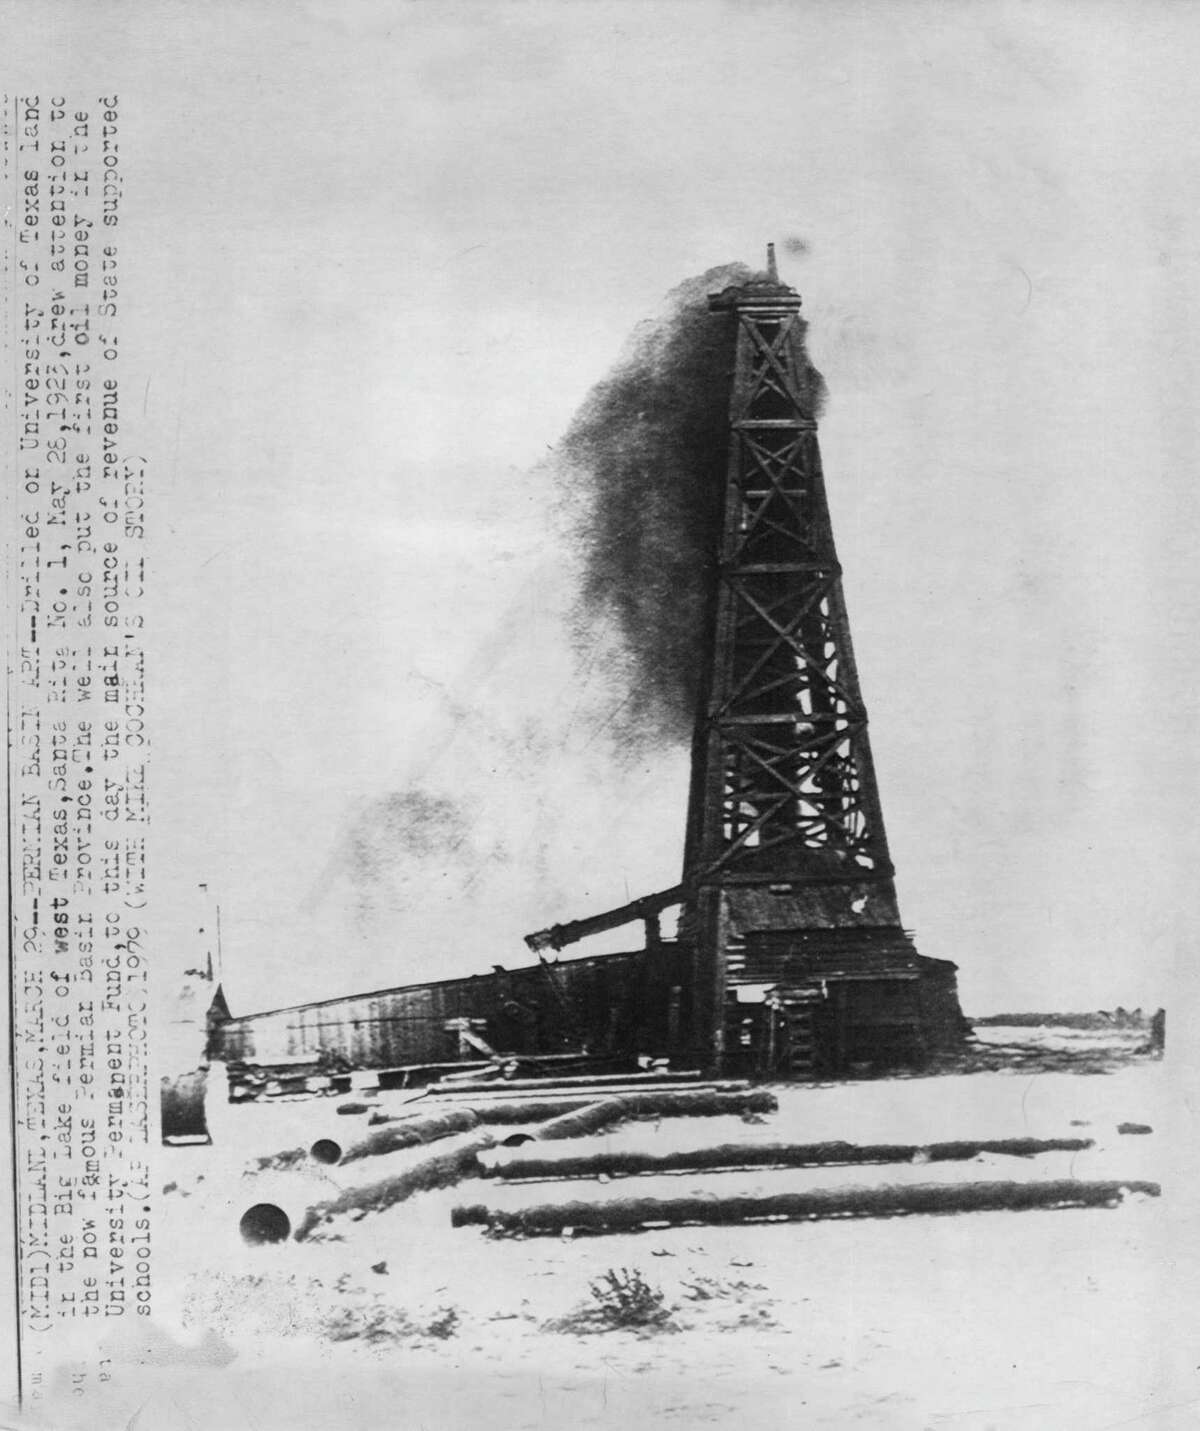 Drilled on University of Texas land in the Big Lake field in West Texas on May 28, 1923, the Santa Rita No. 1 drew attention to the now famous Permian Basin oil field. The well also put the first oil money in the University Permanent Fund, which originally benefited the University of Texas, but now benefits both the UT and Texas A&M University systems.